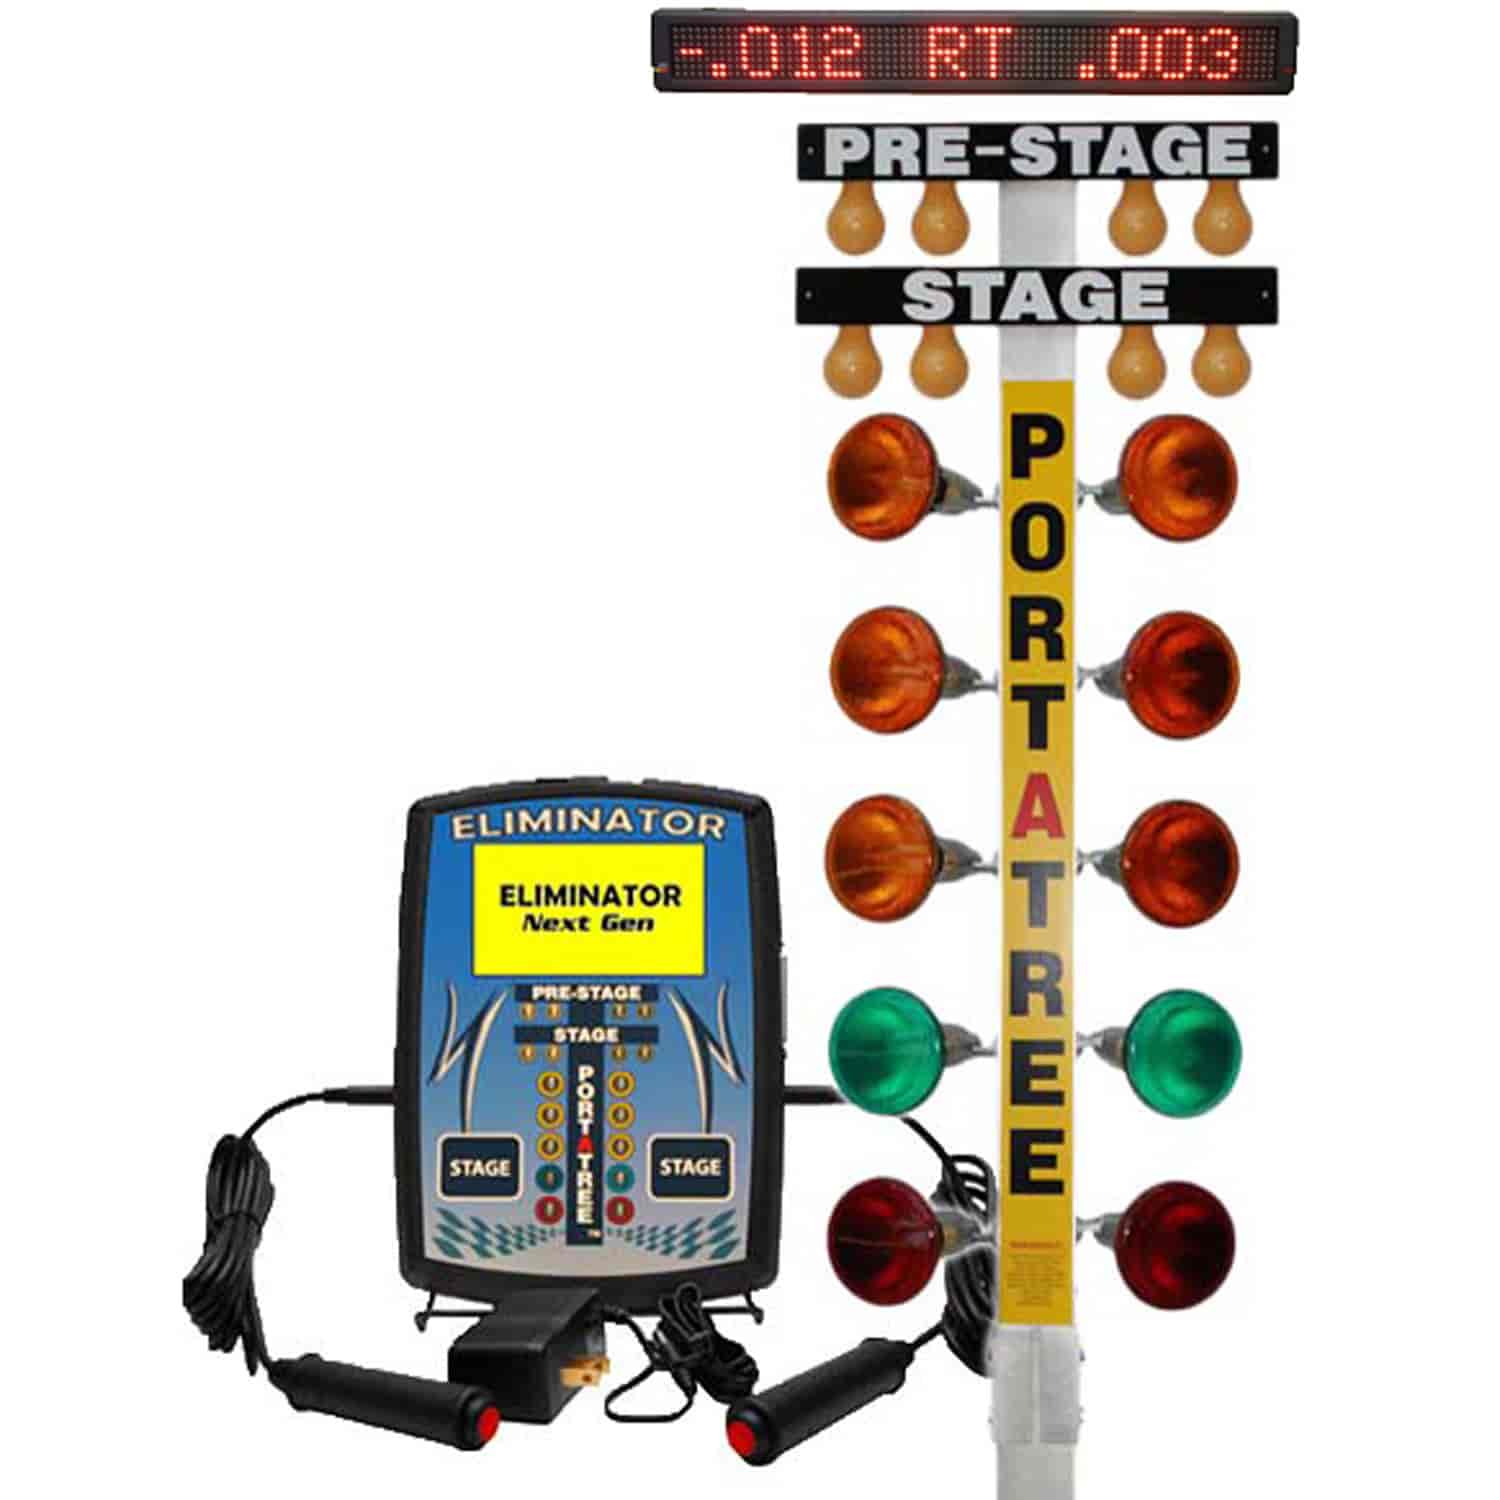 Eliminator Next Gen with National Event Tree and 2" x 15 Character Display